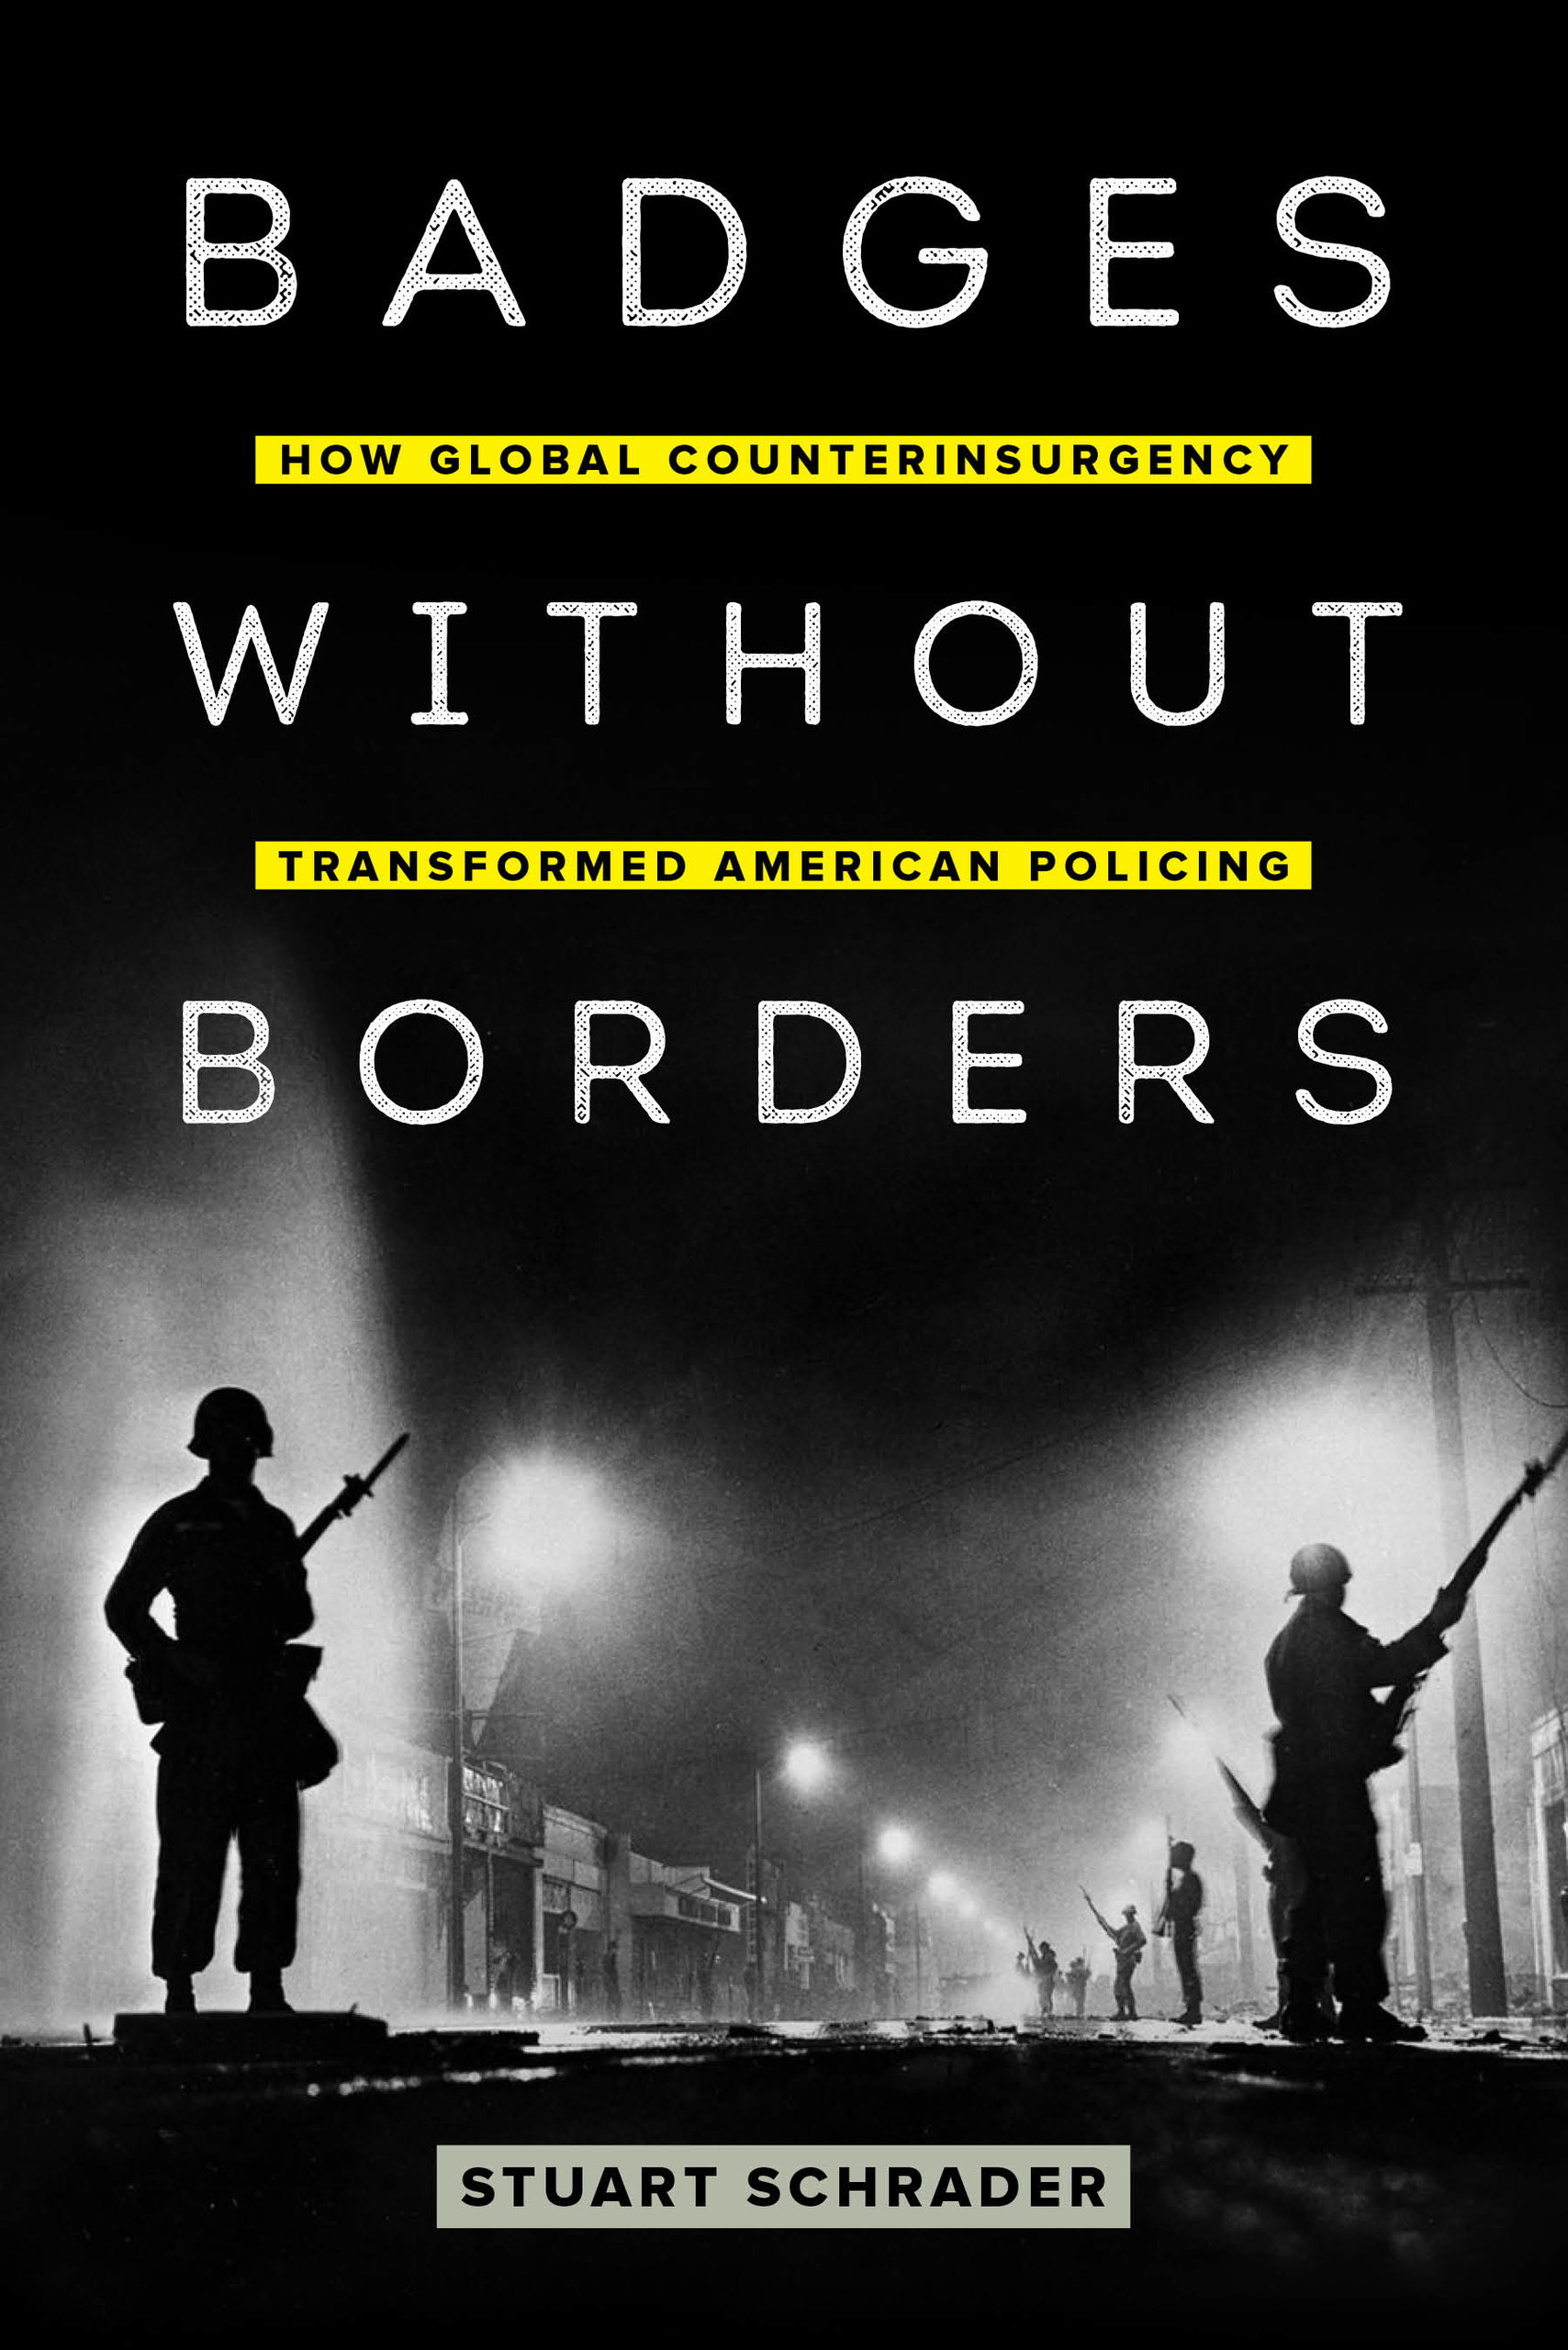 The cover of Badges without Borders: How Global Counterinsurgency Transformed American Policing